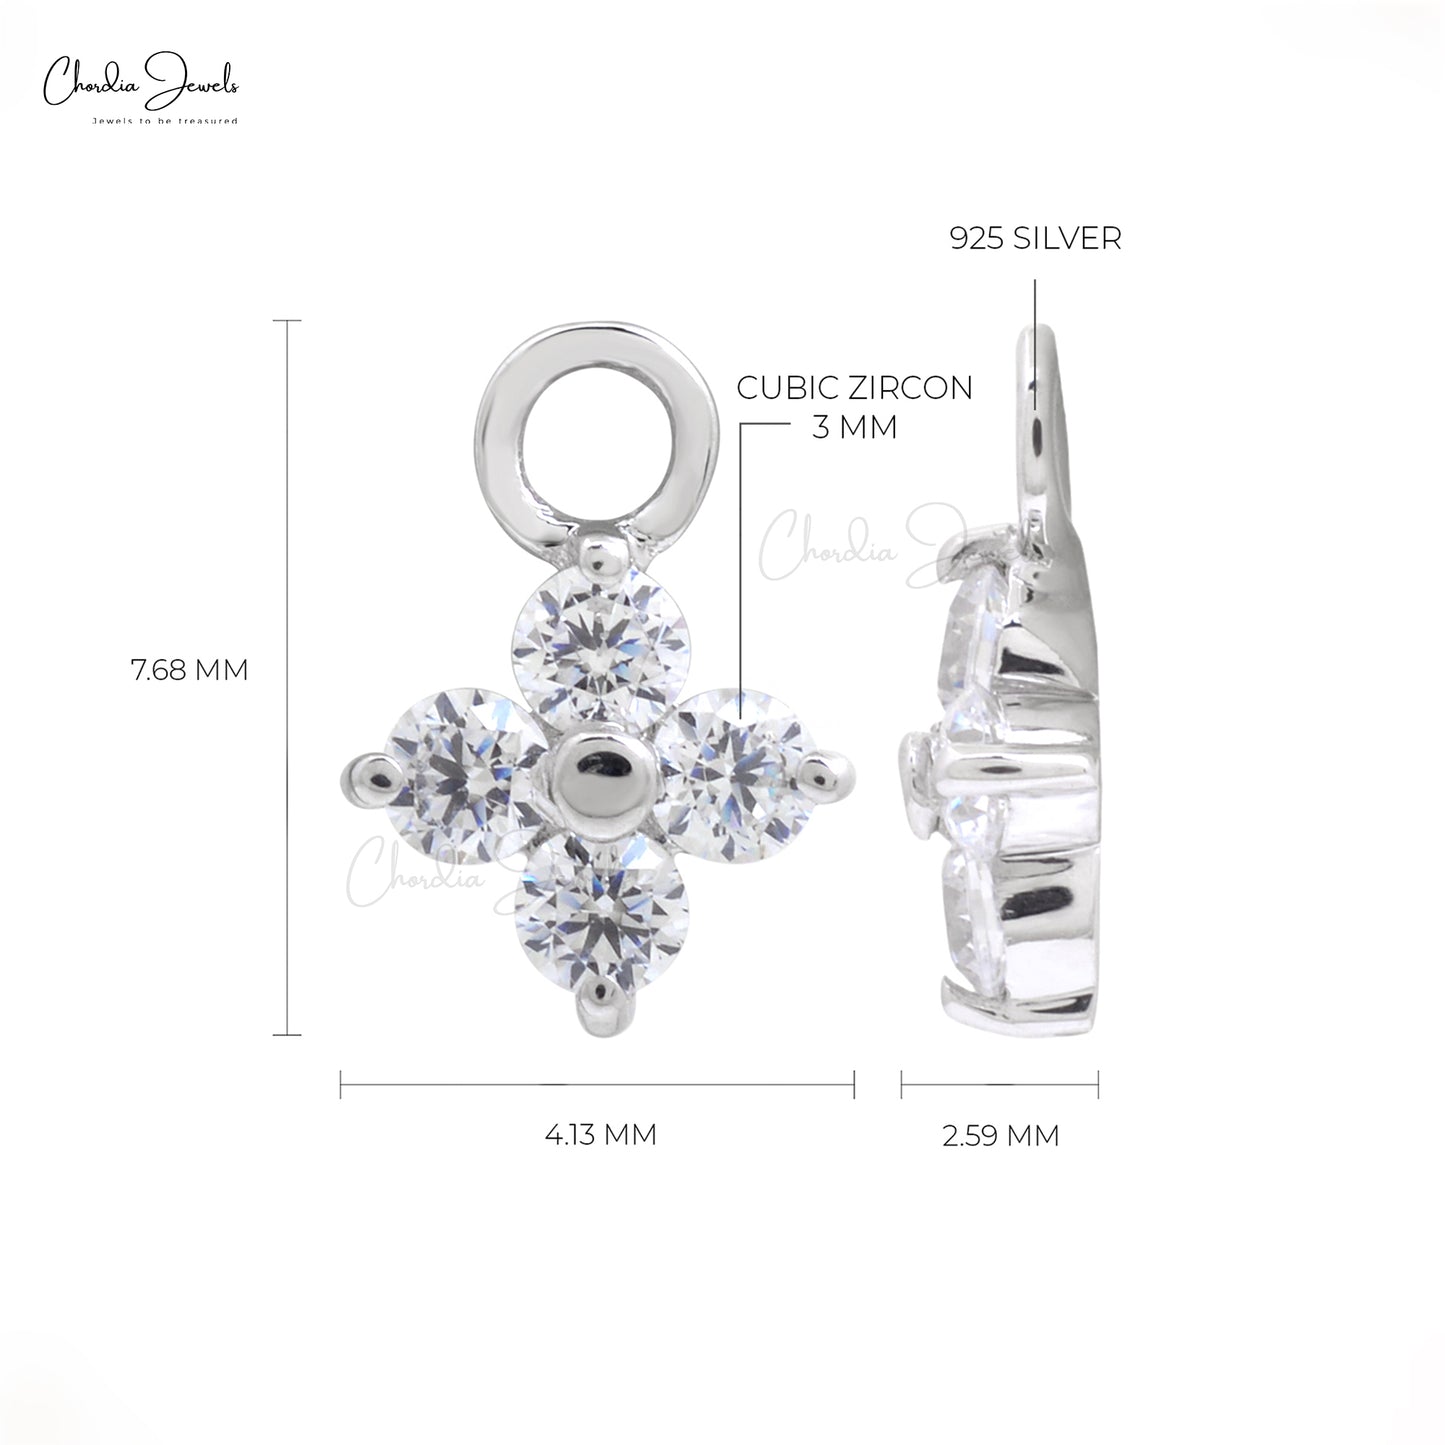 Top Quality 925 Sterling Silver Cubic Zircon Prong Charm Pendant Necklace Round Gemstone Jewelry At Discount Price